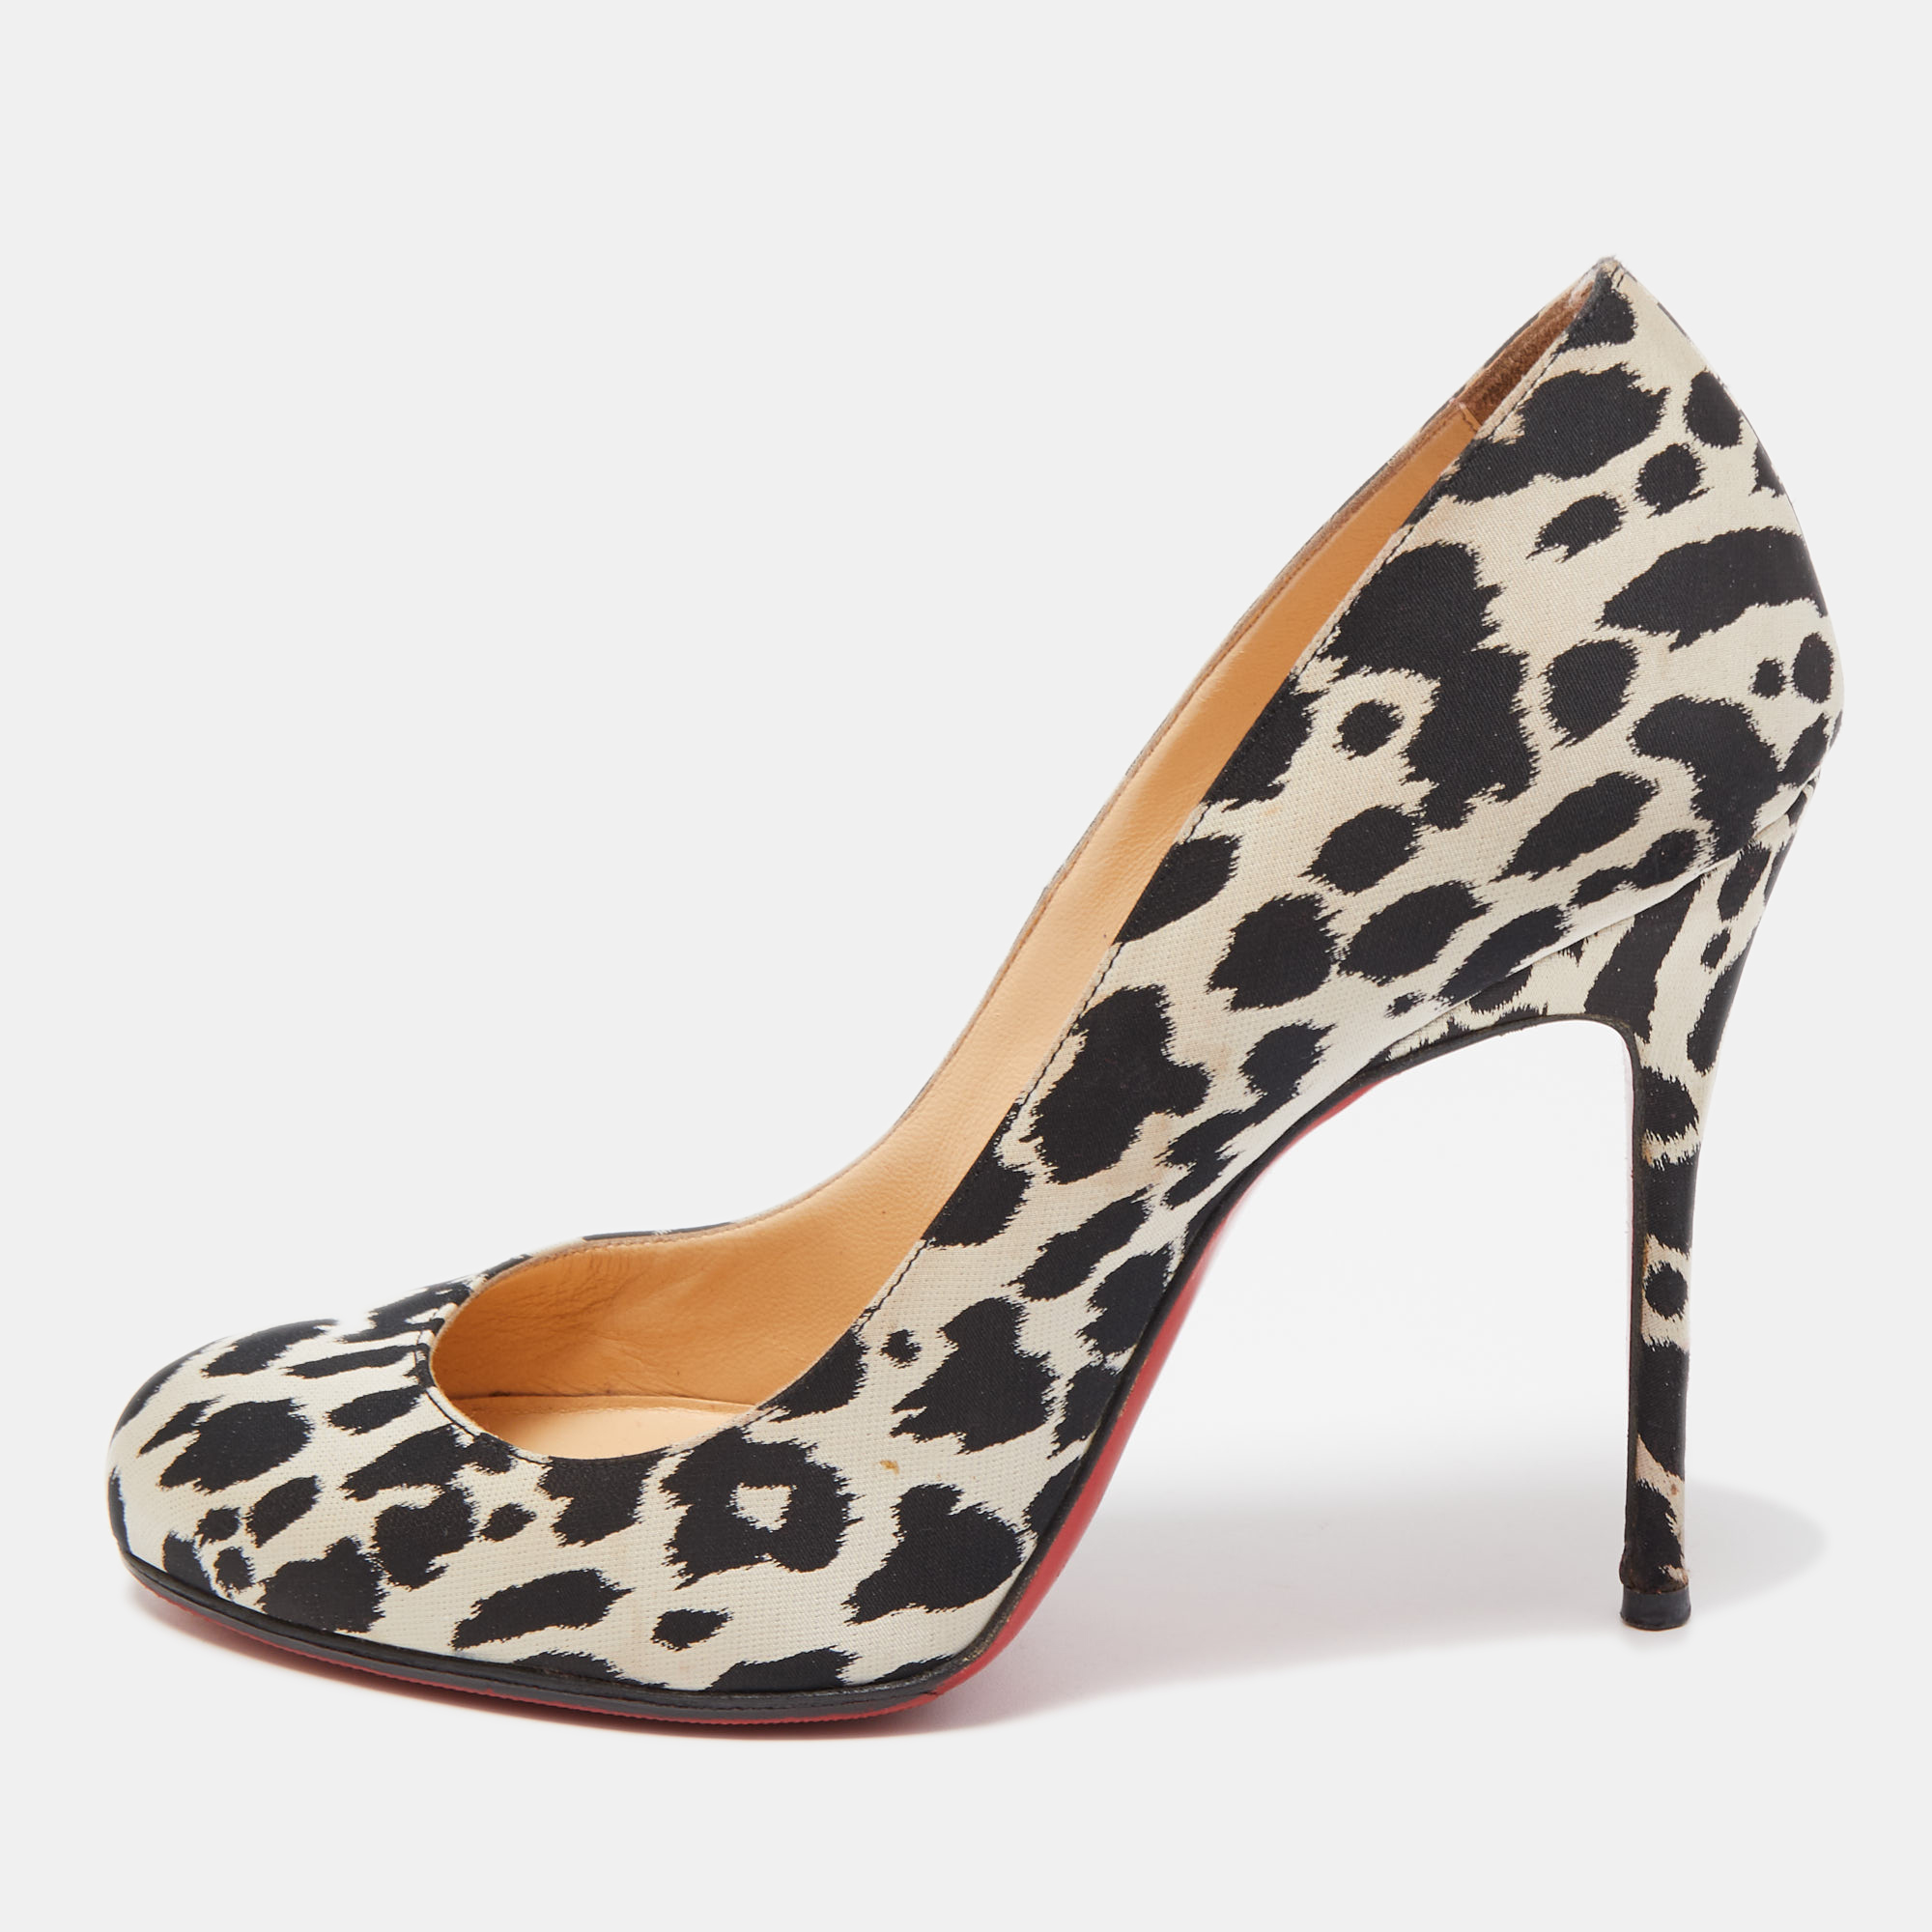 Pre-owned Christian Louboutin Black/white Fabric Leopard Print Simple Pumps Size 38